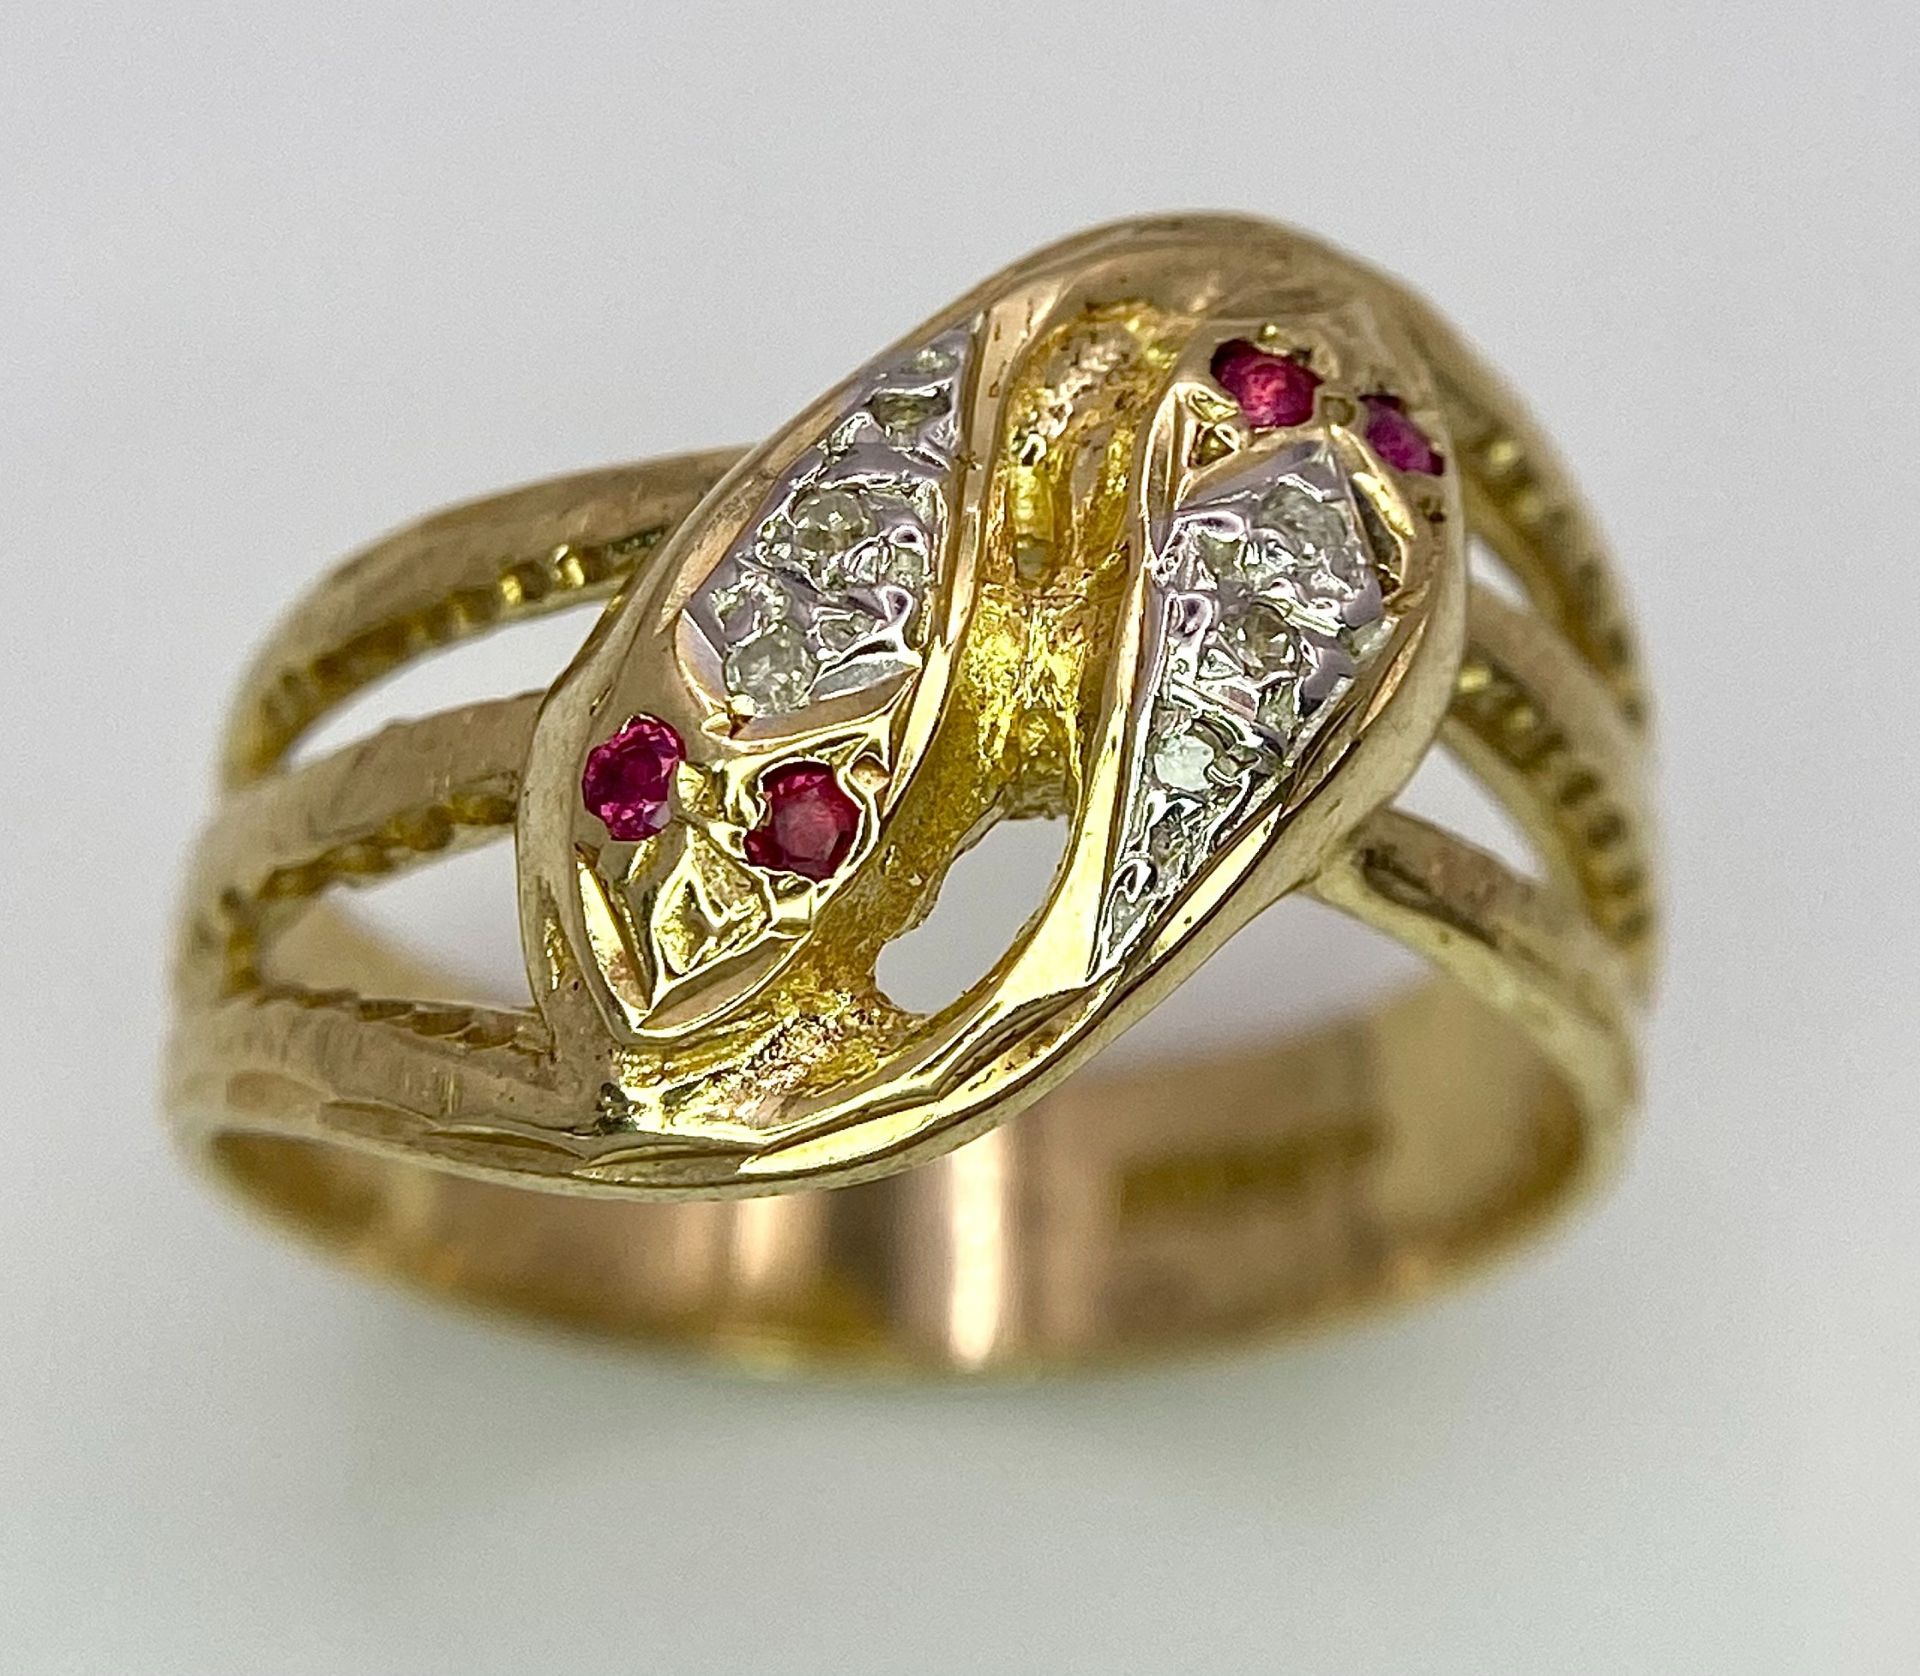 A 9K YELLOW GOLD DIAMOND & RUBY DOUBLE SERPENT RING! 5.3G. SIZE Q.